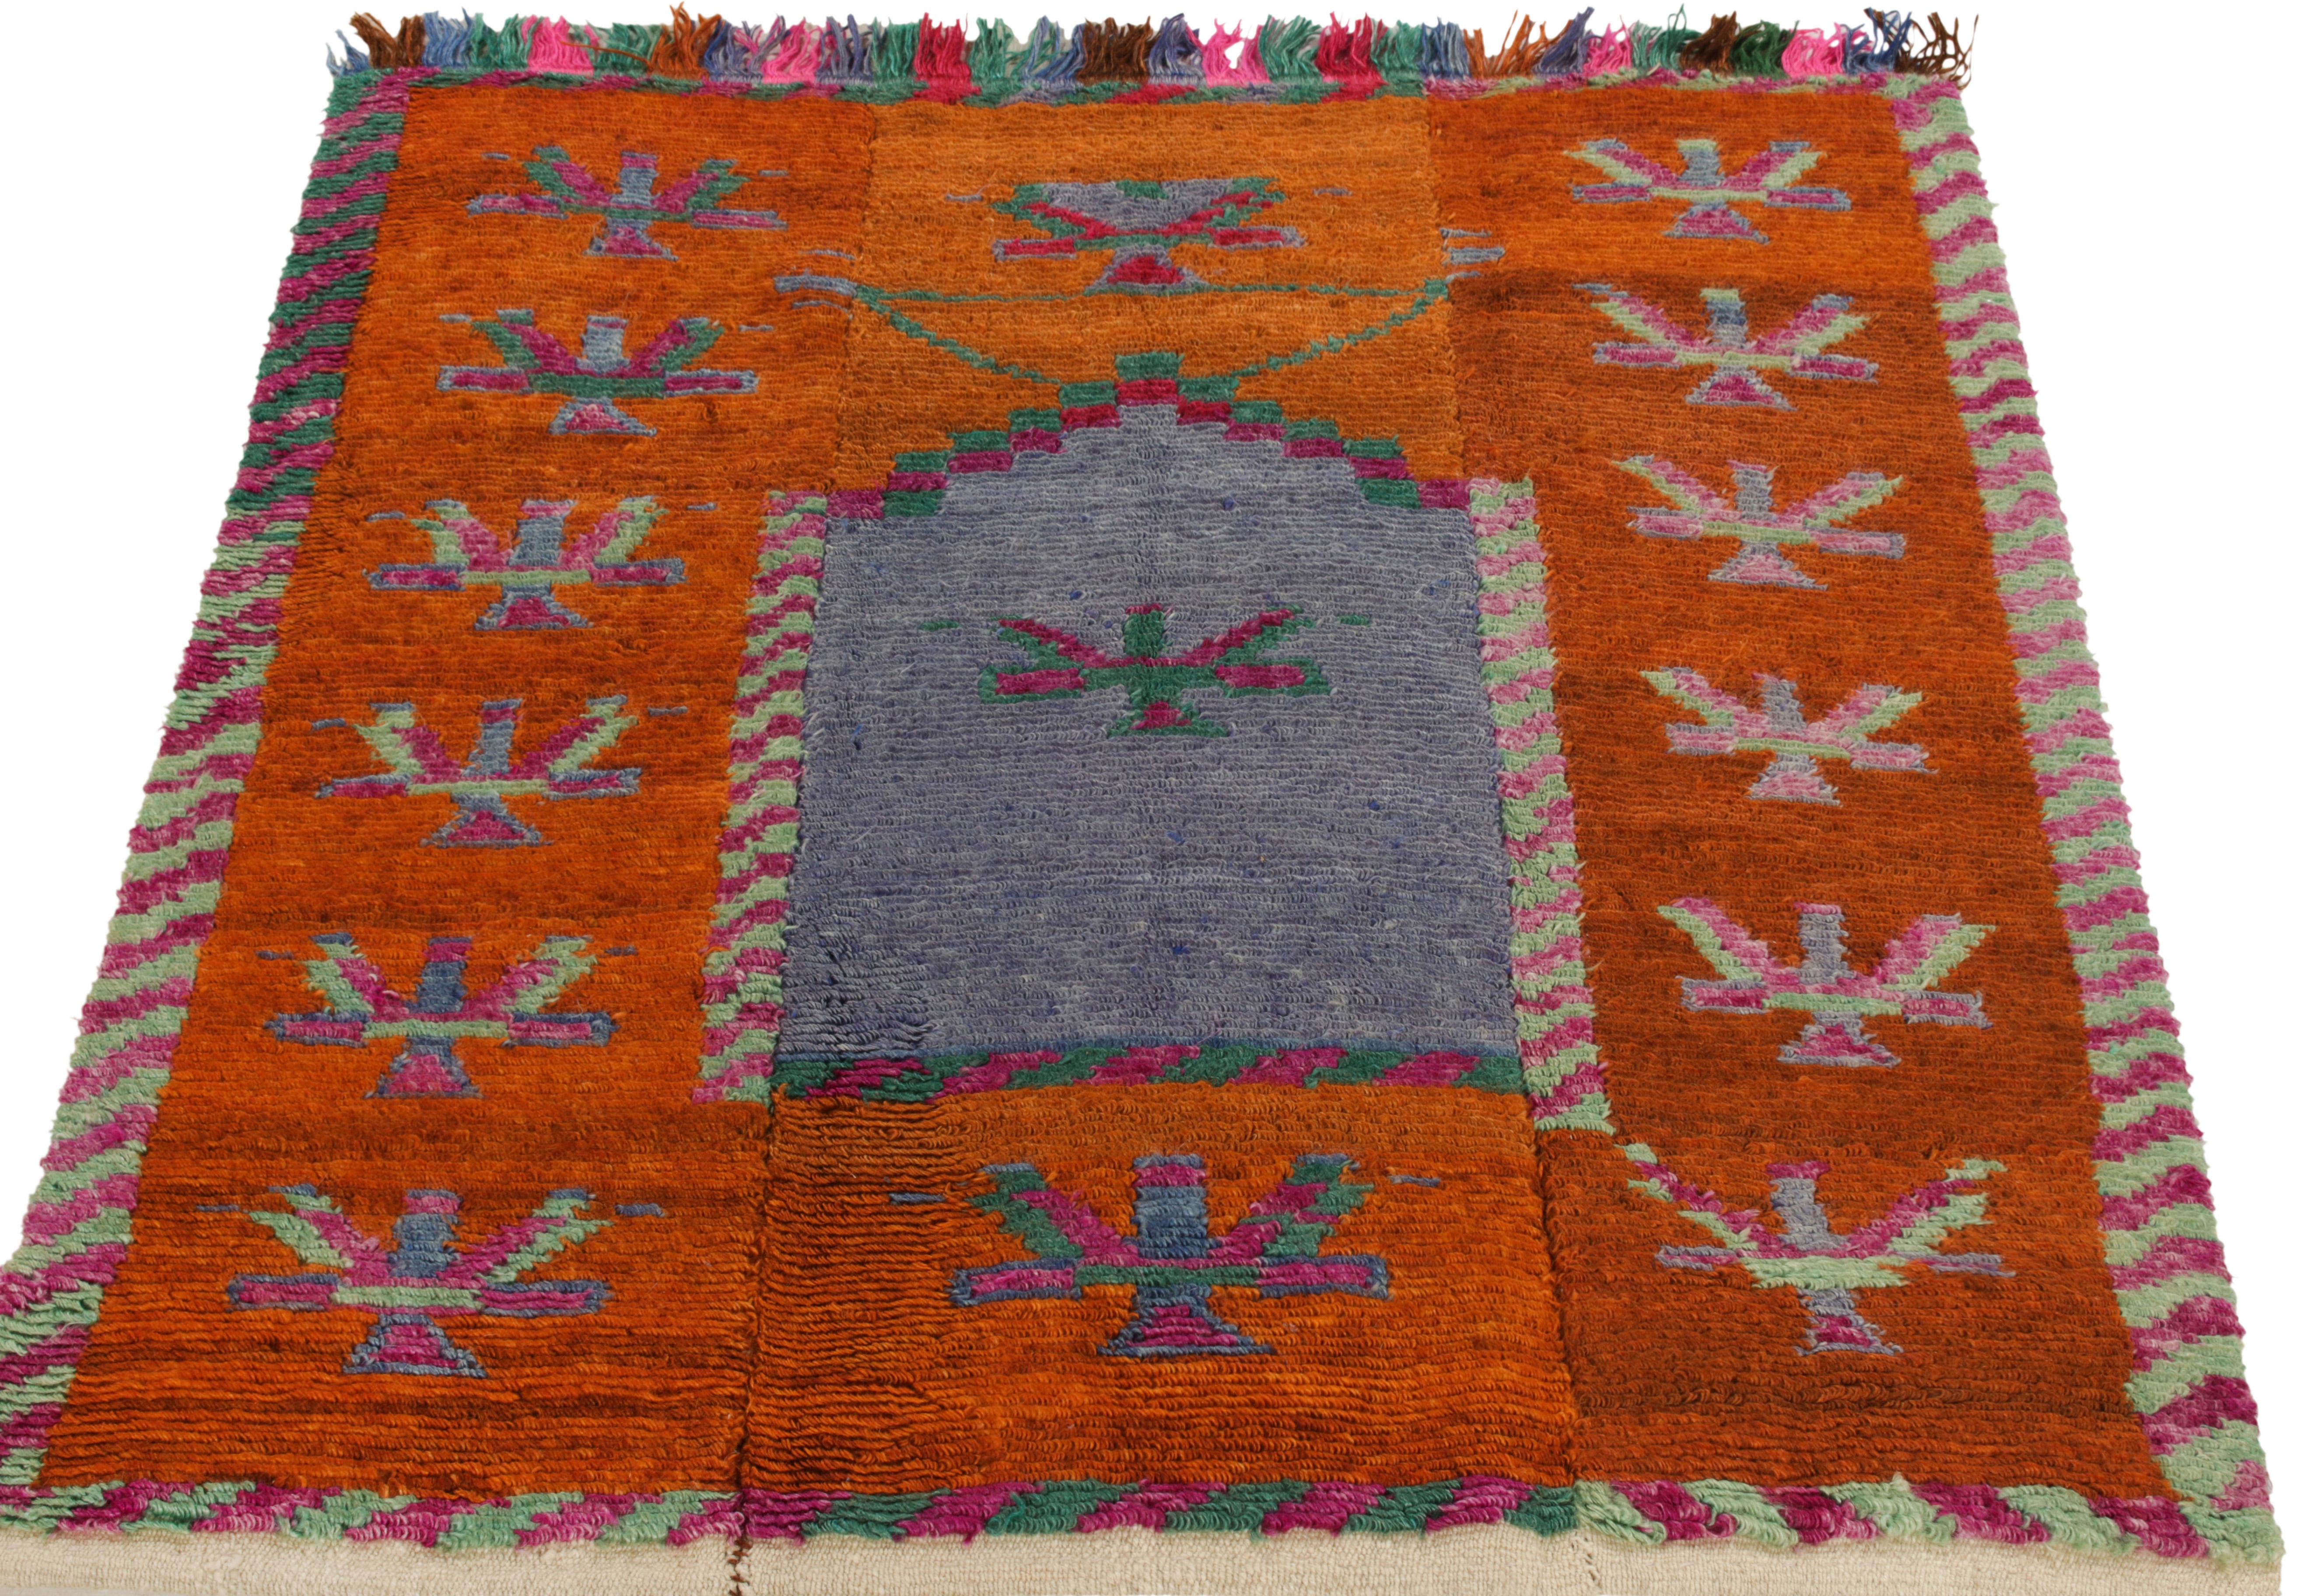 Hand-knotted in wool from Turkey circa 1950-1960, a vintage 4x5 Tulu rug from our Antique & Vintage collection exemplifying the mid-century style—featuring tribal patterns on the field in bright orange, magenta & green complementing the luscious